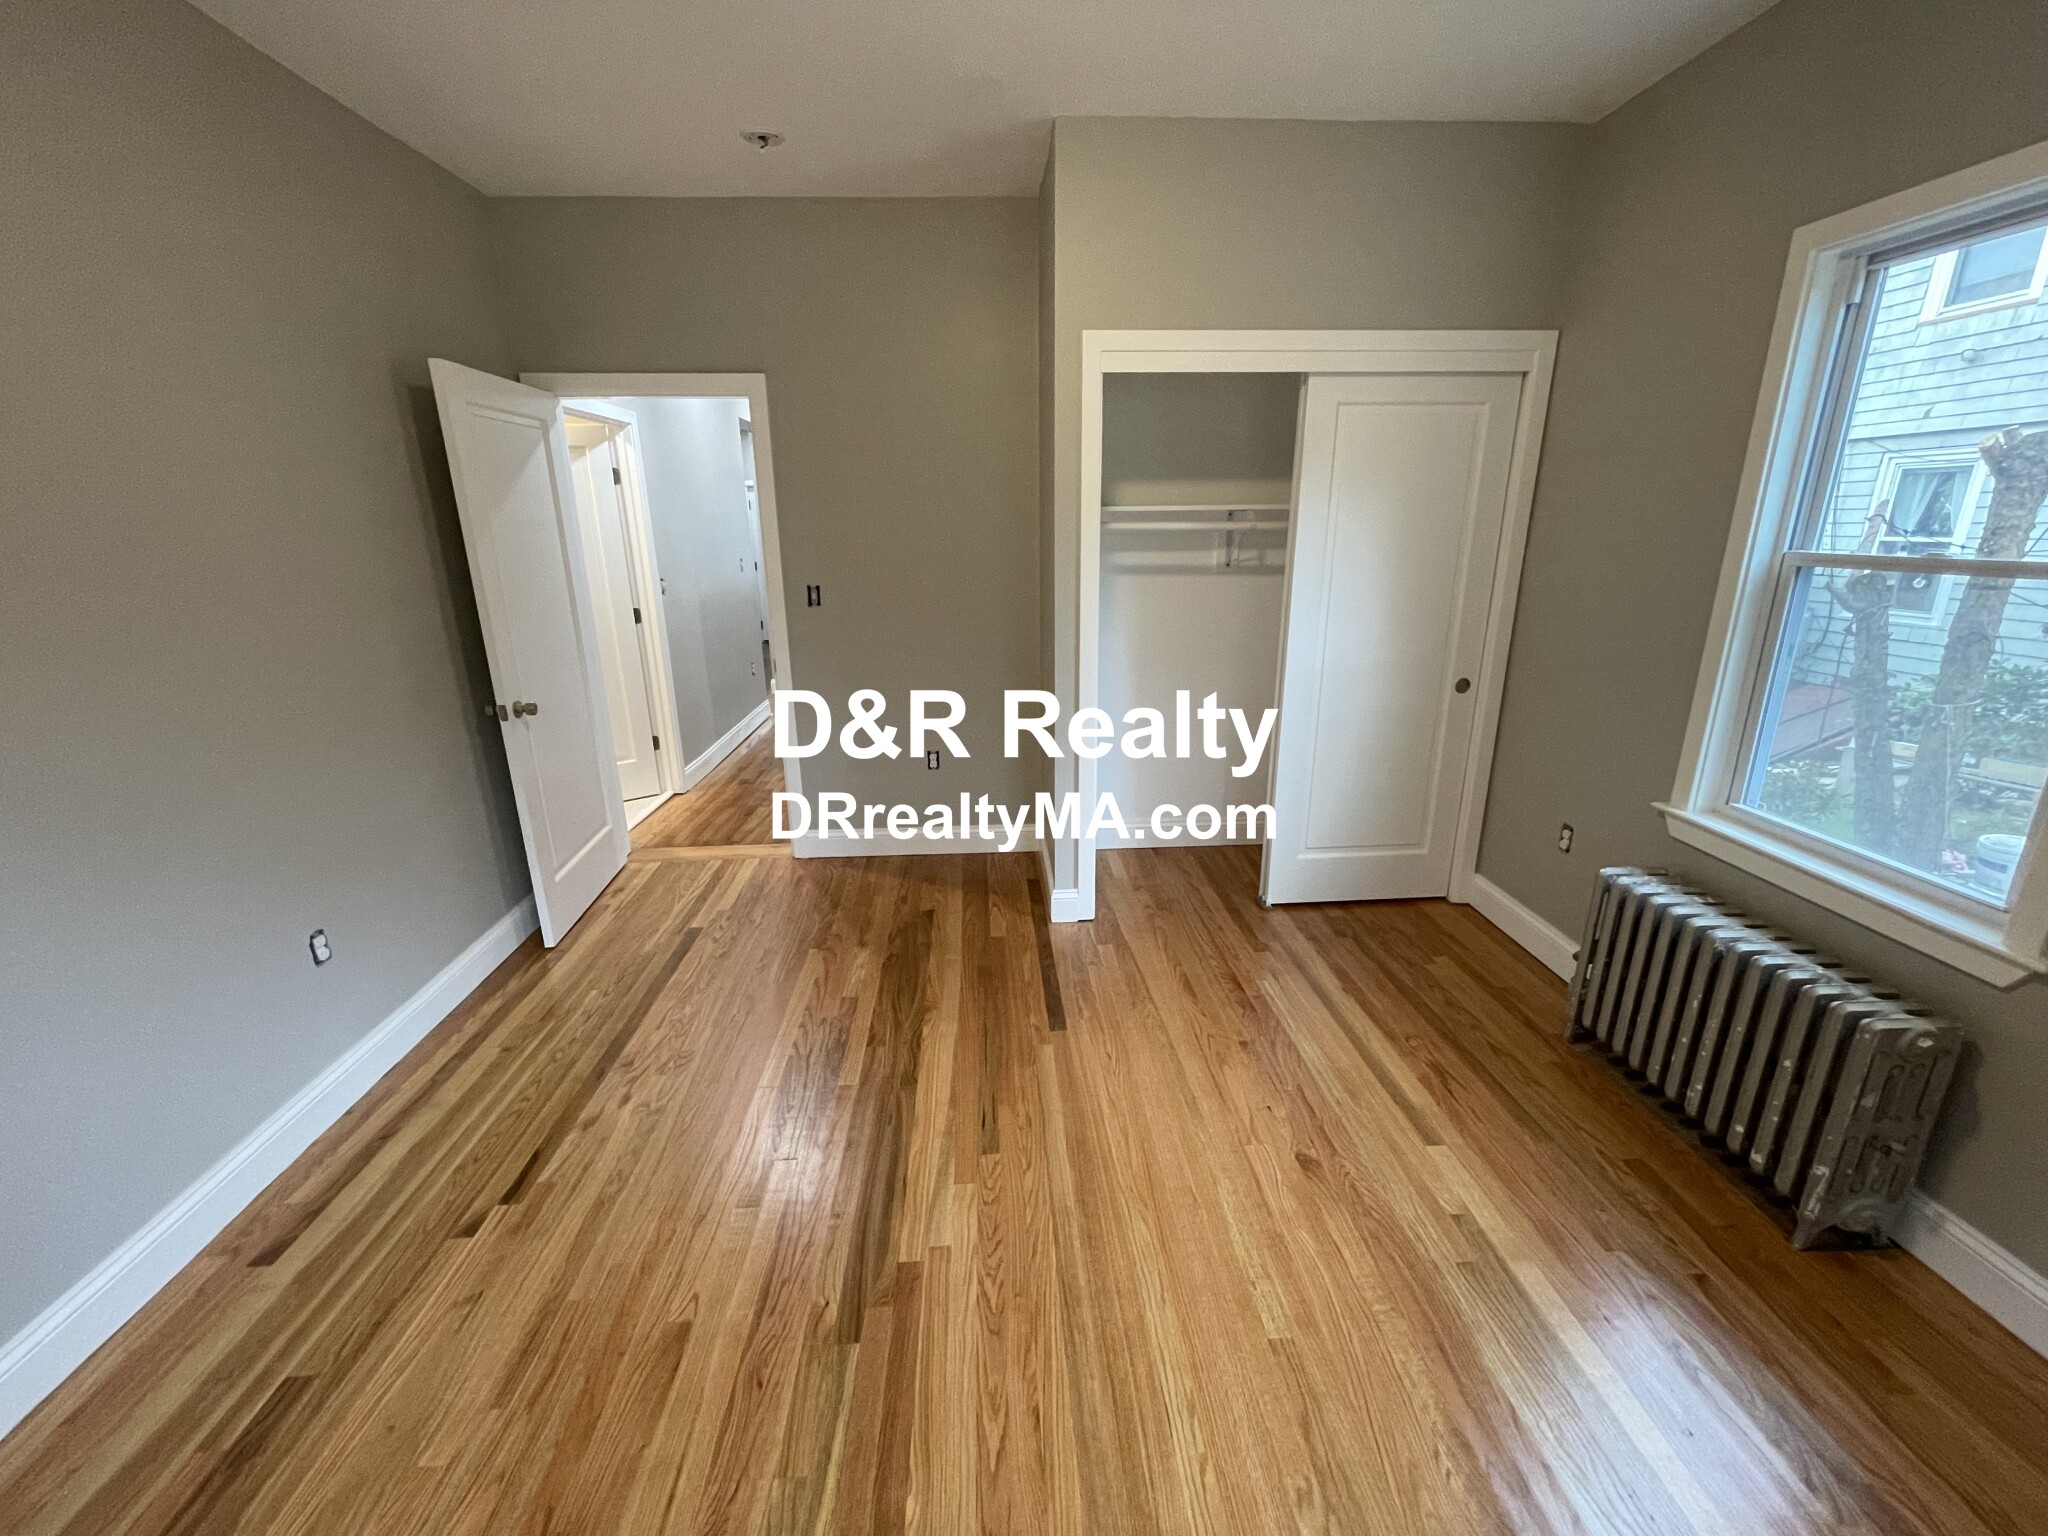 Photos of apartment on Fremont Ave.,Everett MA 02149